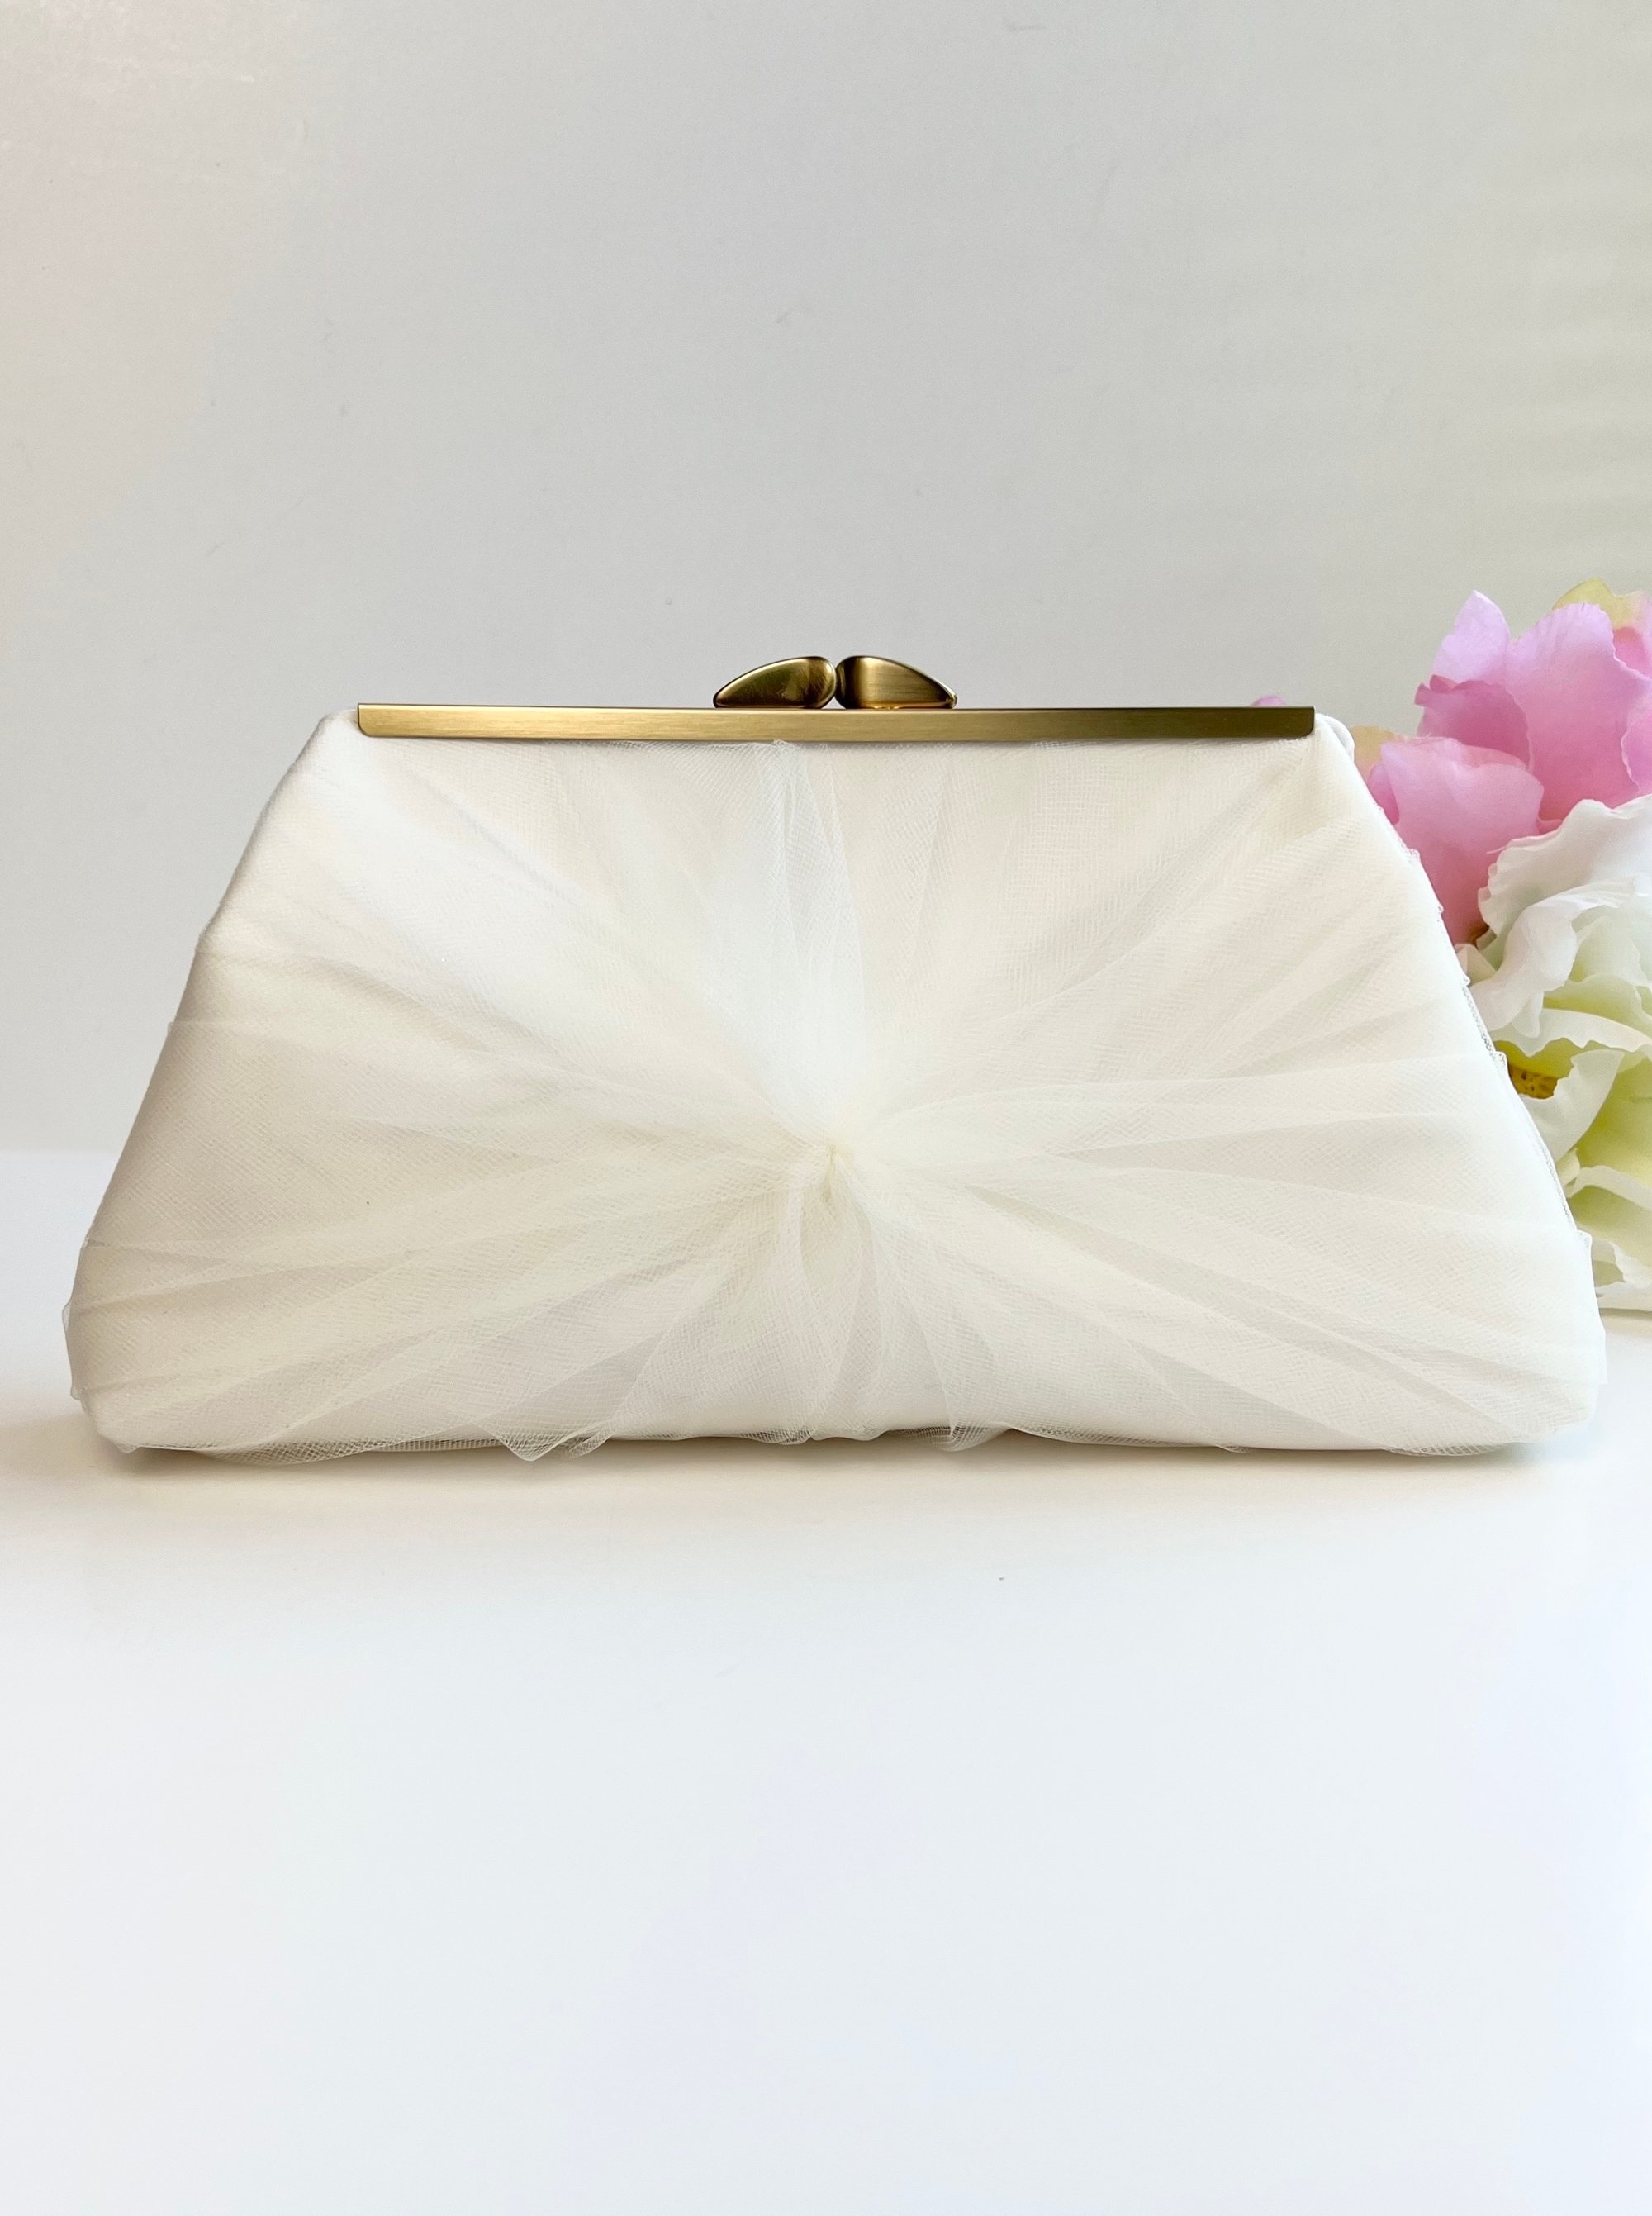 Pretty Clutch Bags for Weddings. Mother of the Bride Clutch Bags